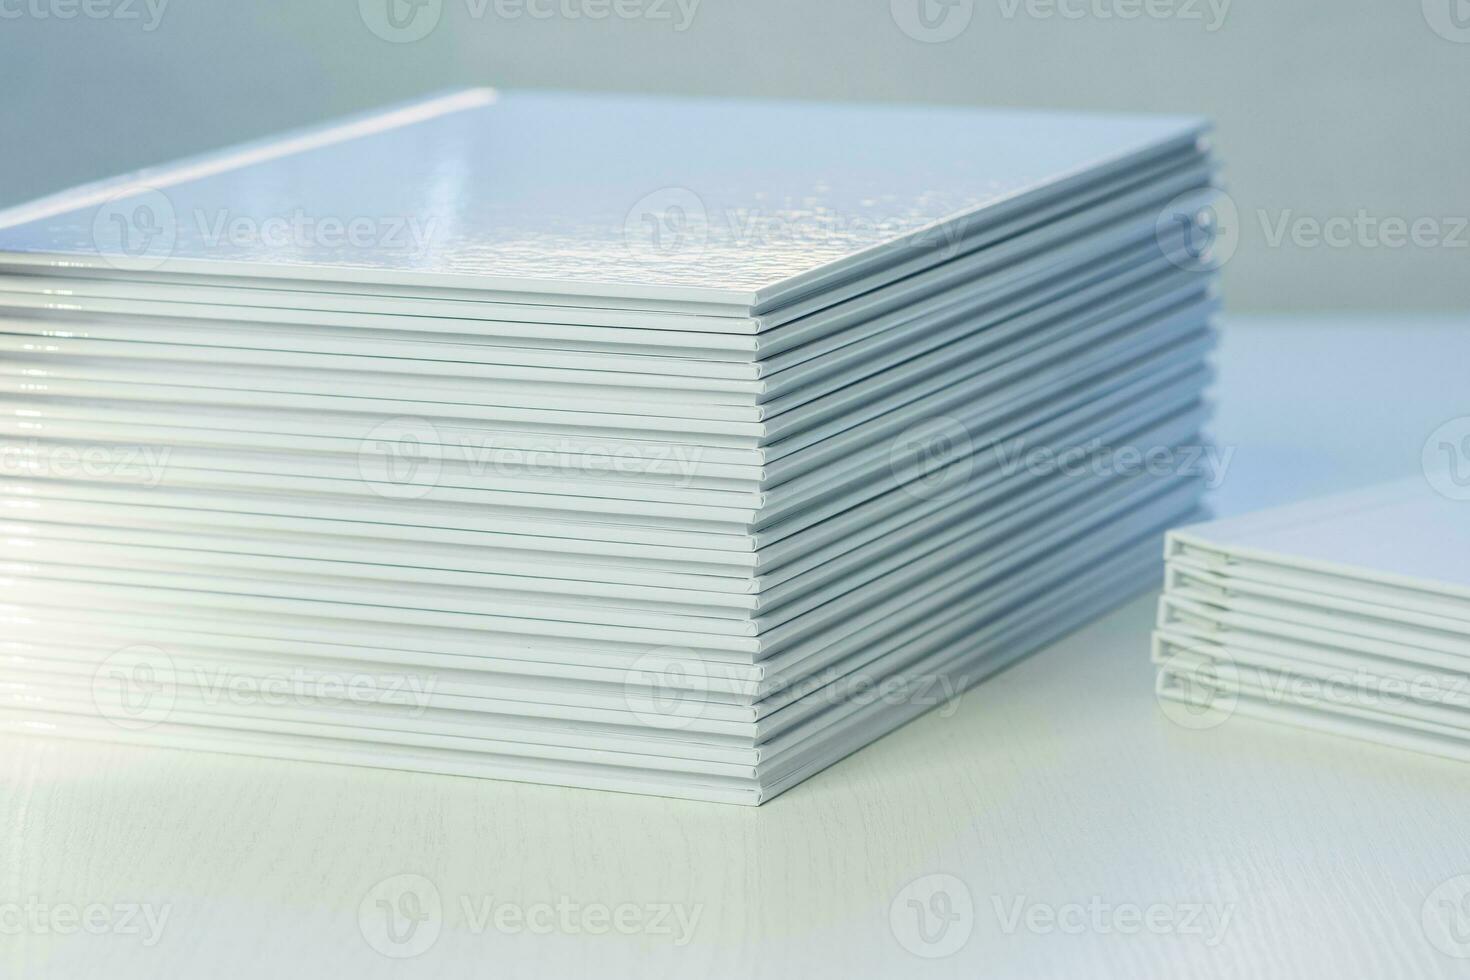 stacks of freshly printed photobooks with clean white covers on the table close-up photo